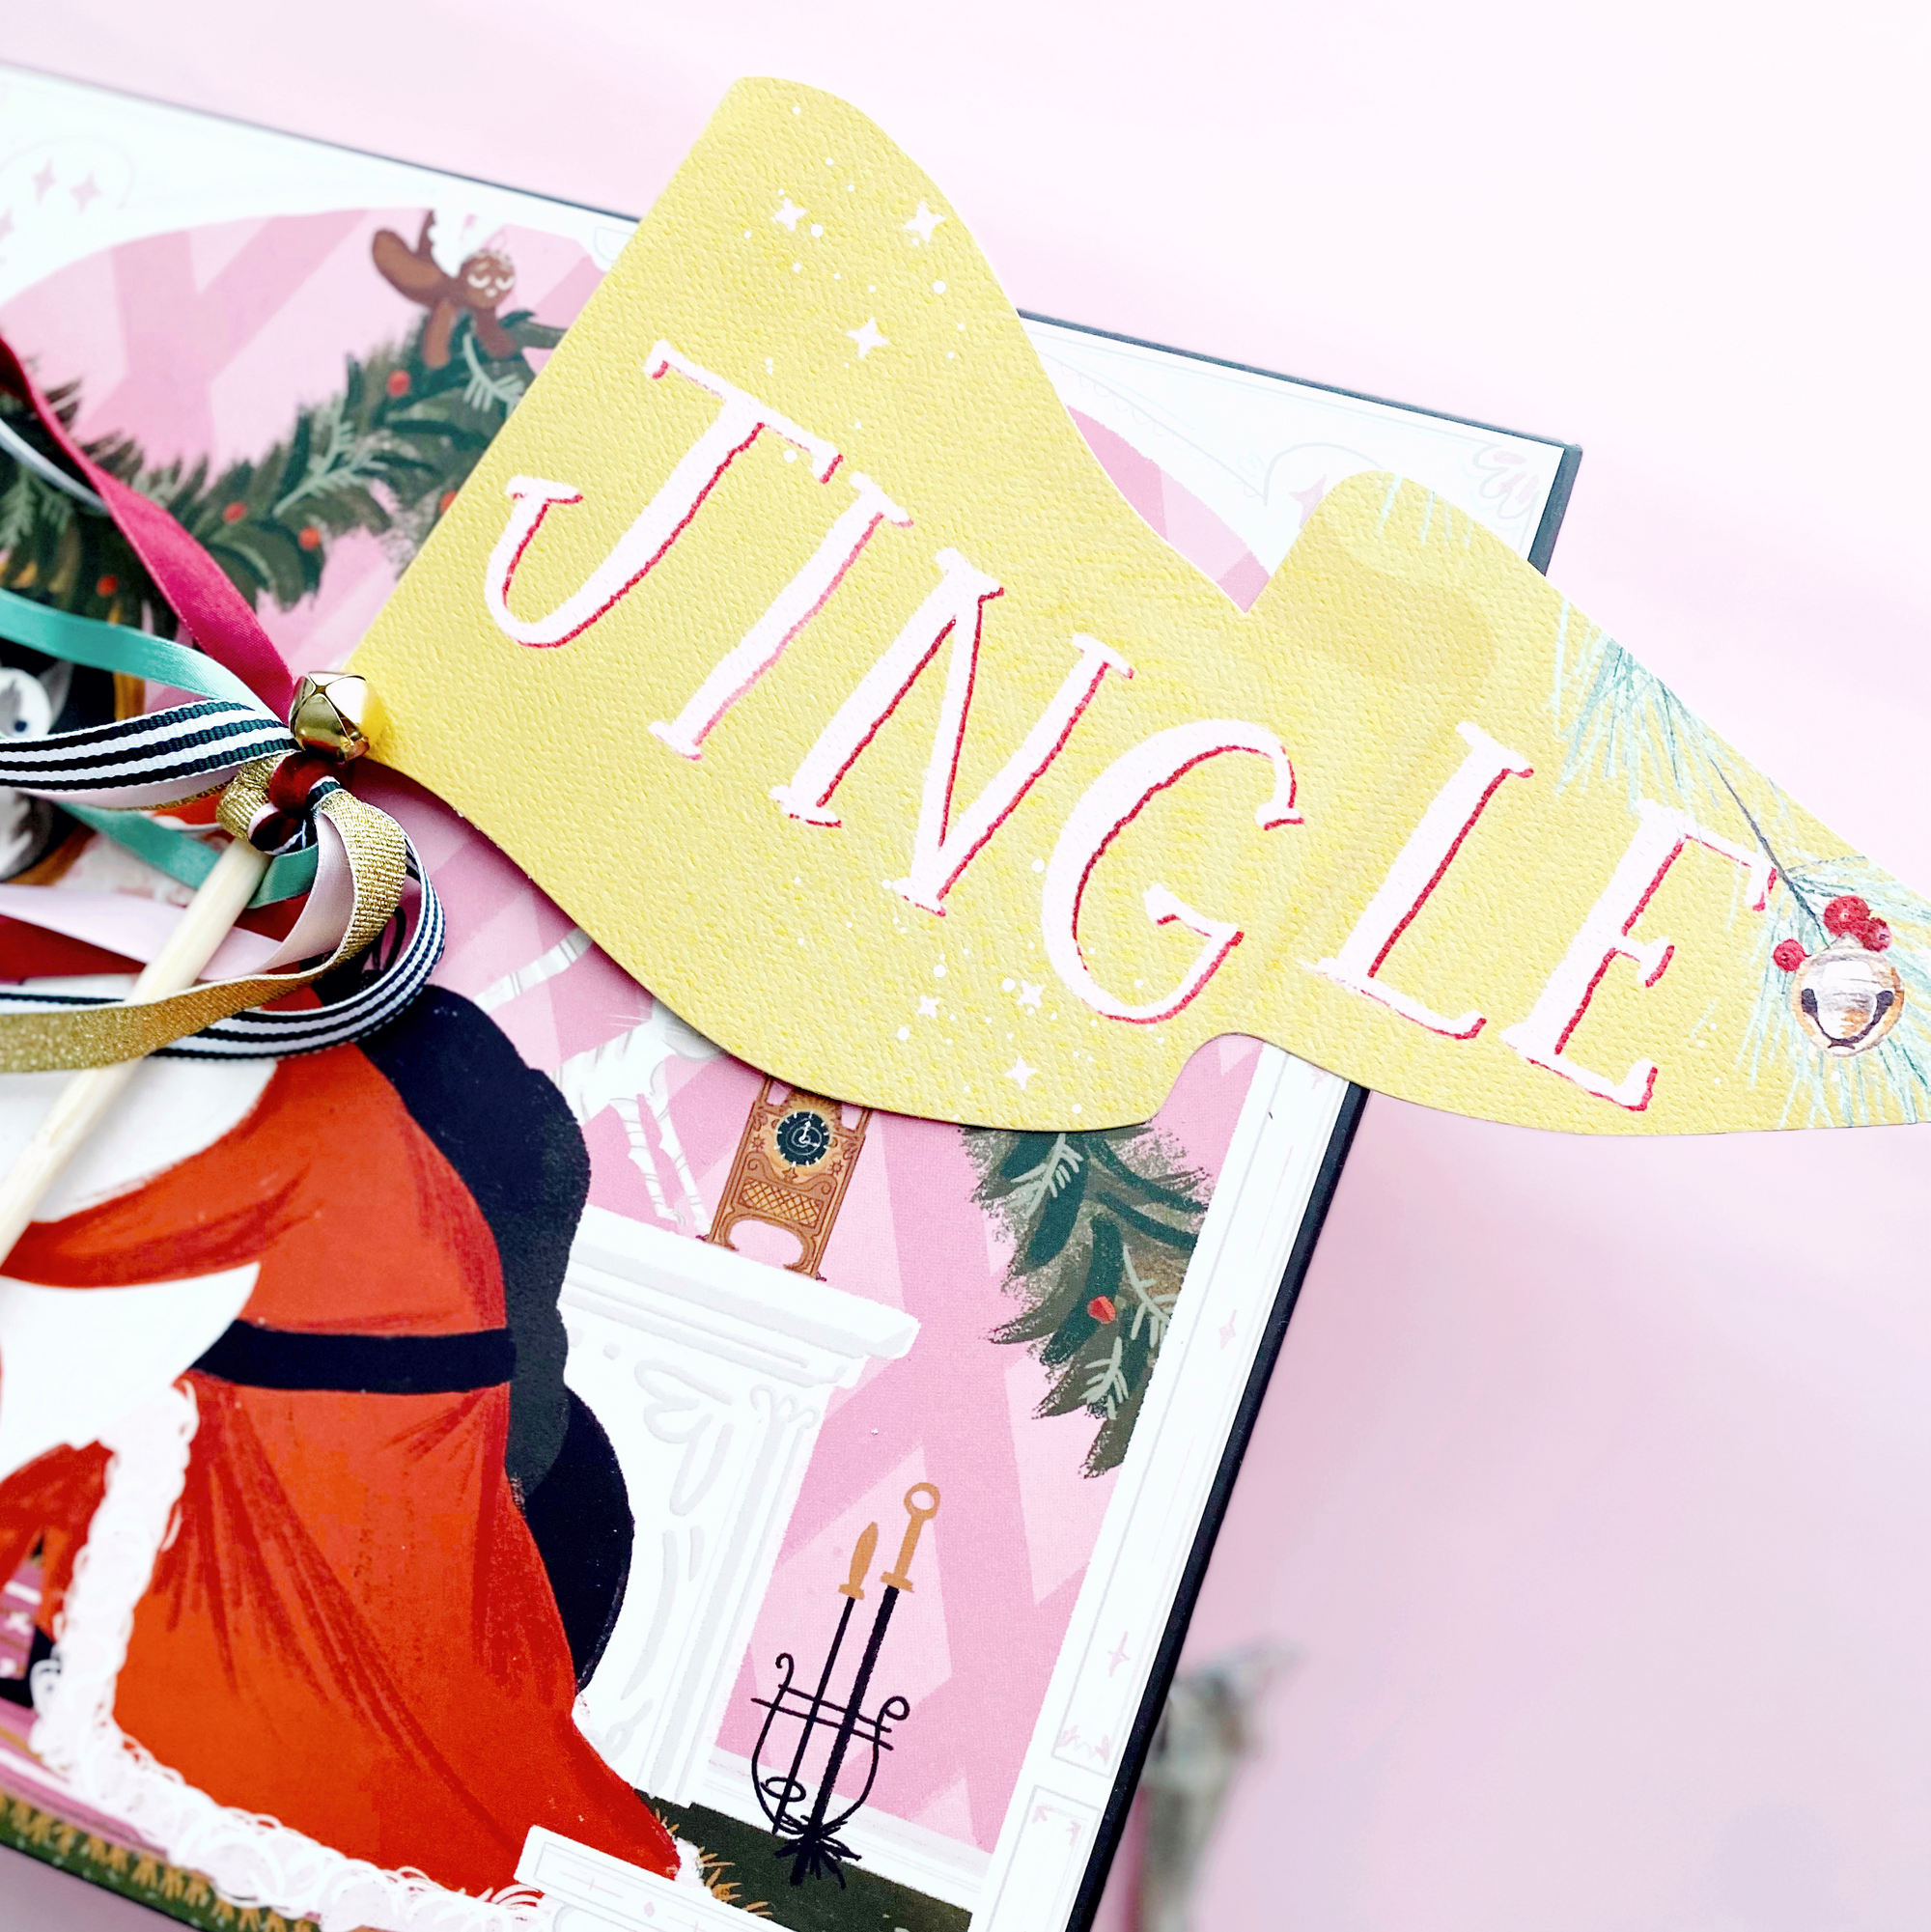 Jingle Party Pennant